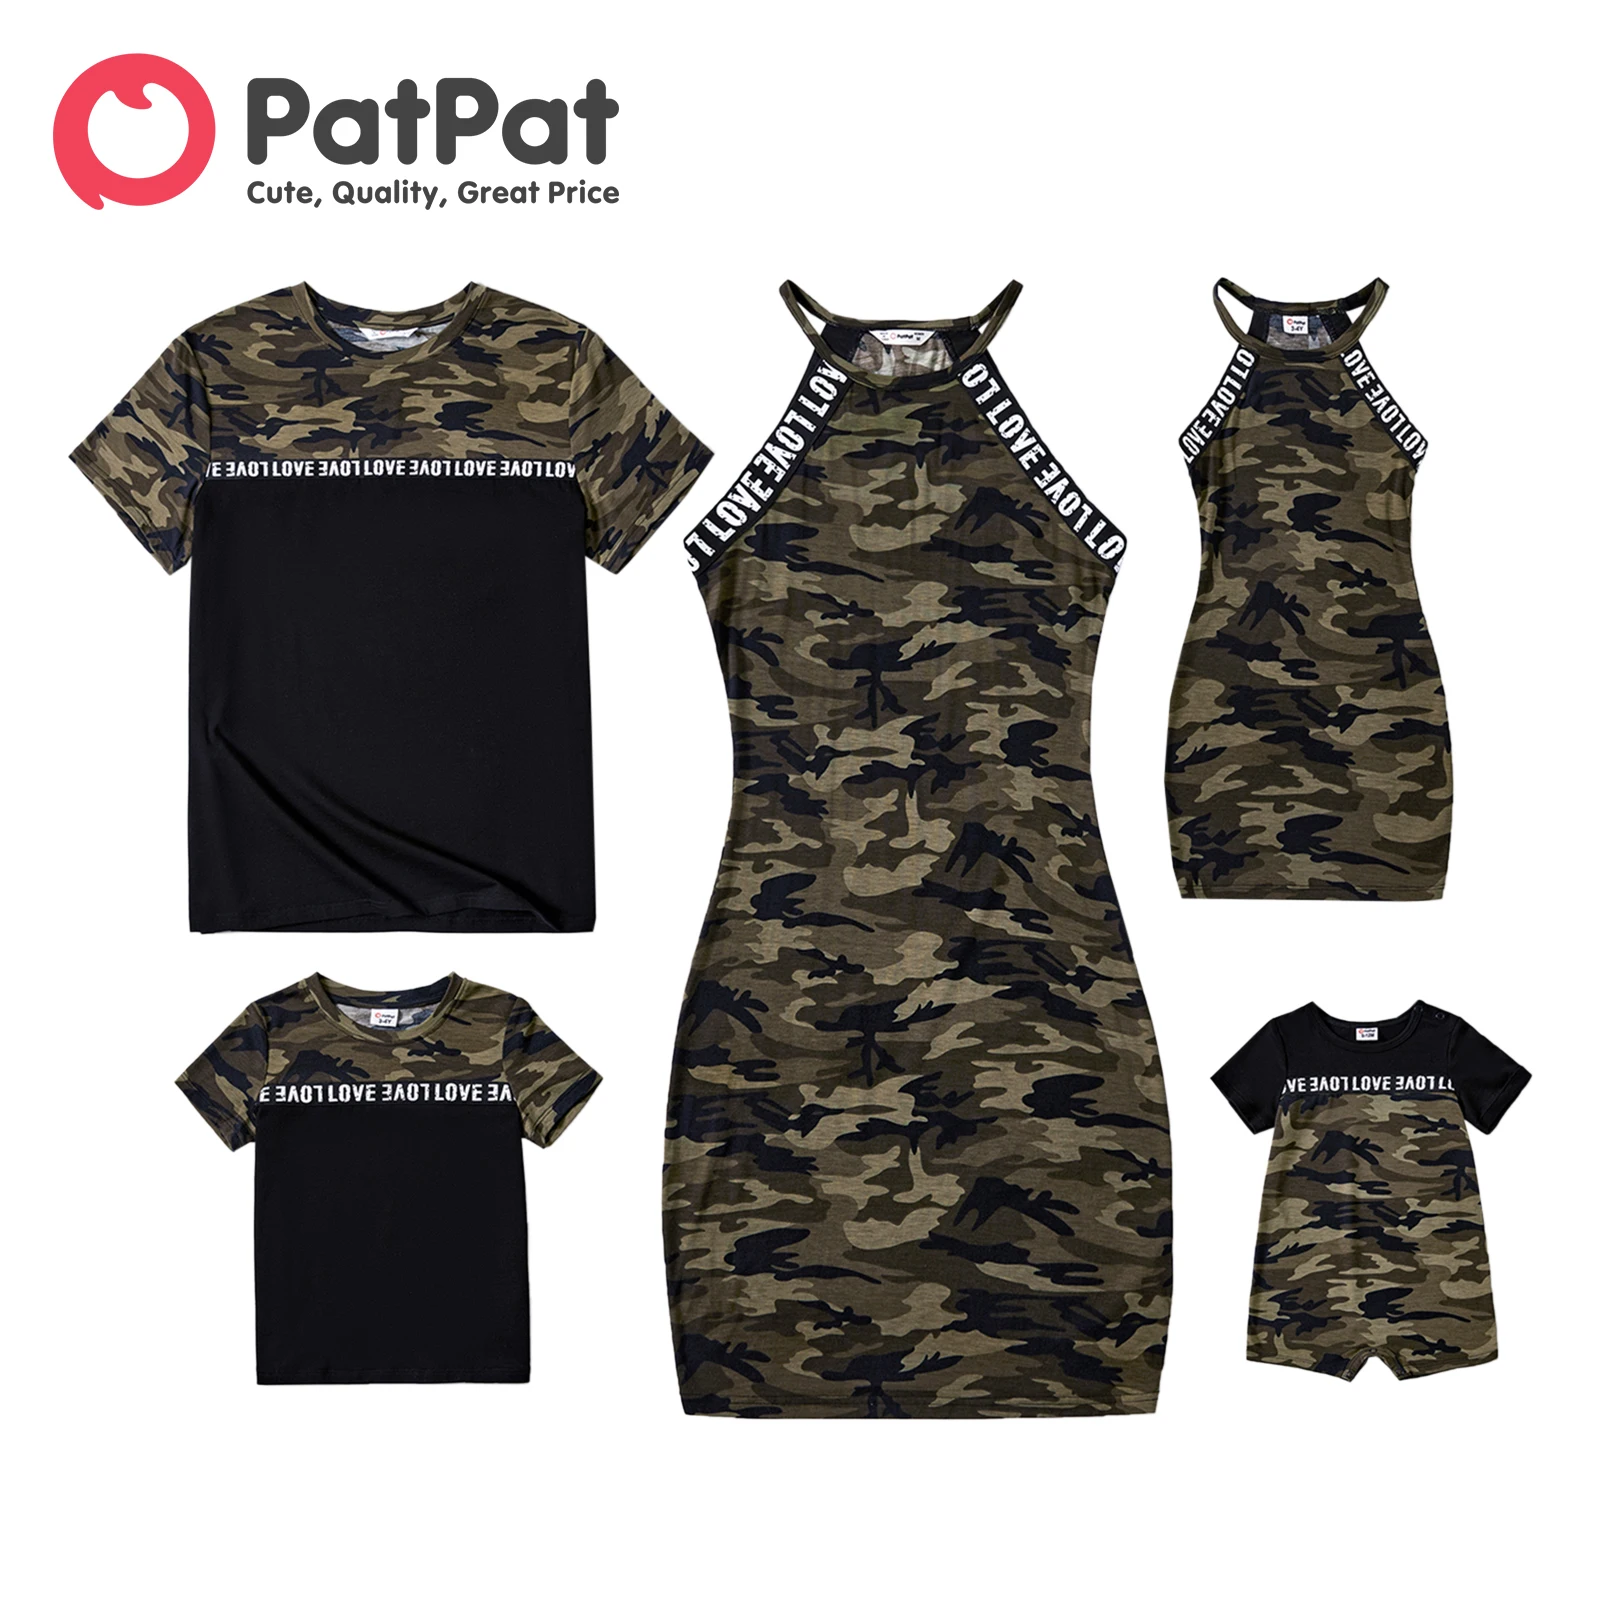 

PatPat Family Matching Outfits Letter Design Halter Neck Sleeveless Bodycon Dresses and Cotton Short-sleeve Spliced T-shirts Set